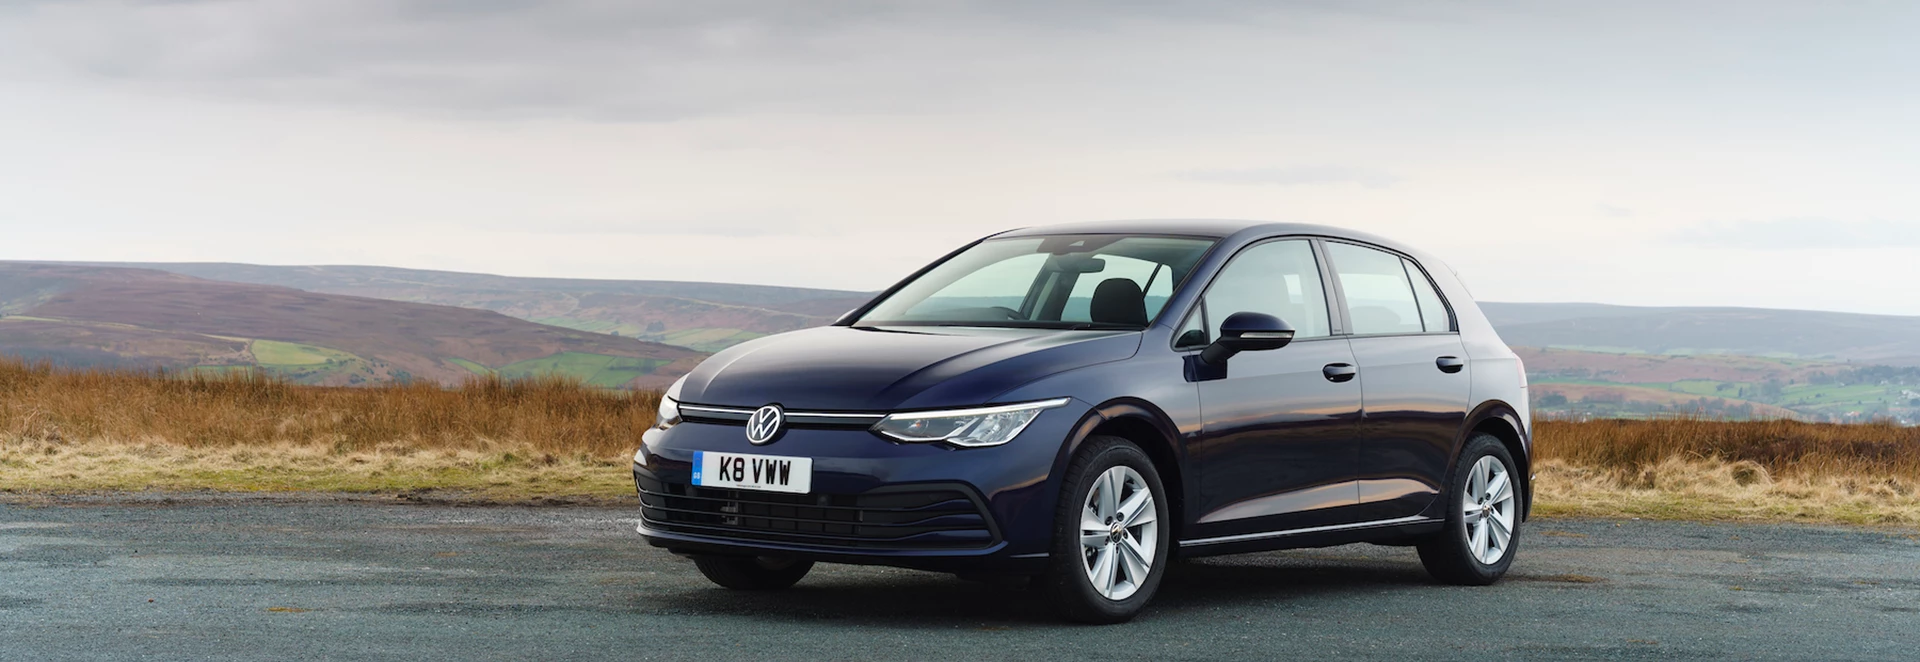 Volkswagen Golf range expanded with new entry-level 1.0-litre petrol option 